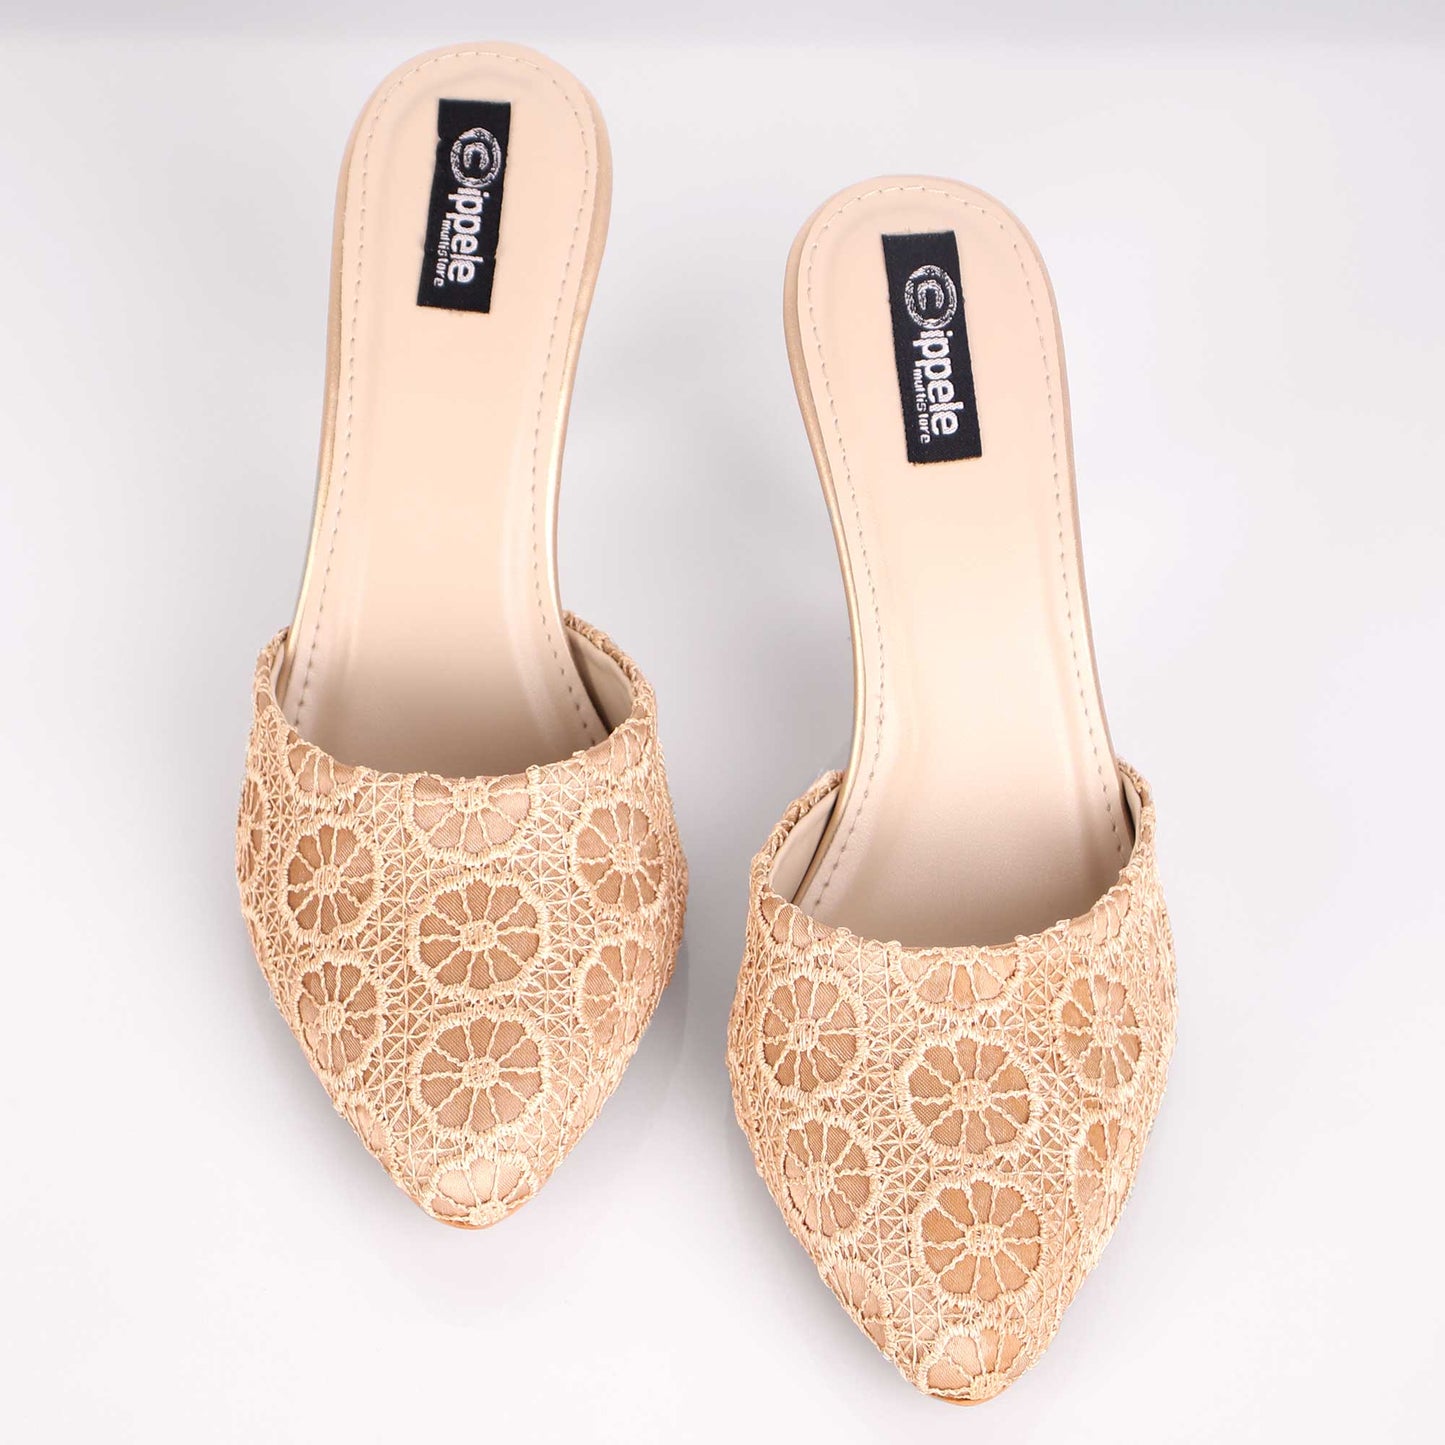 The Succulent Floral Heels in Light Brown